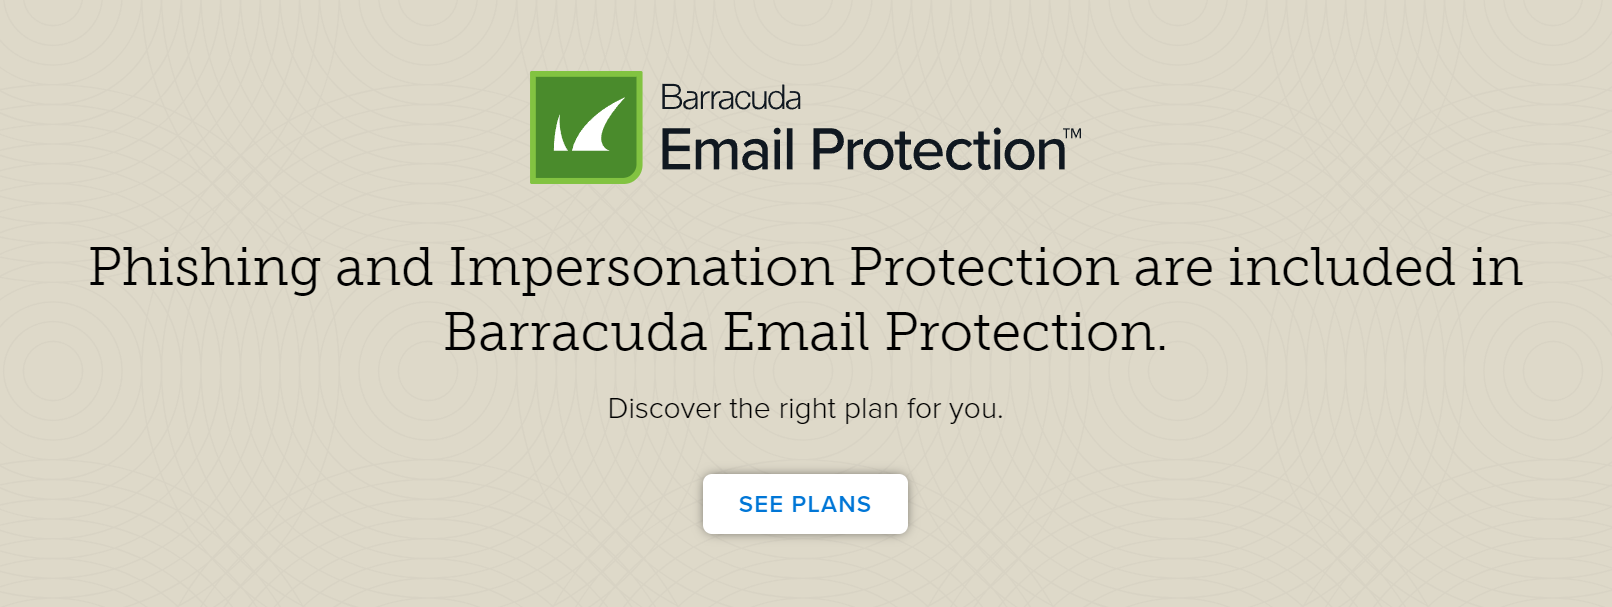 Barracuda's anti-phishing landing page ends with a CTA directing leads to check out the pricing for all its email protection plans